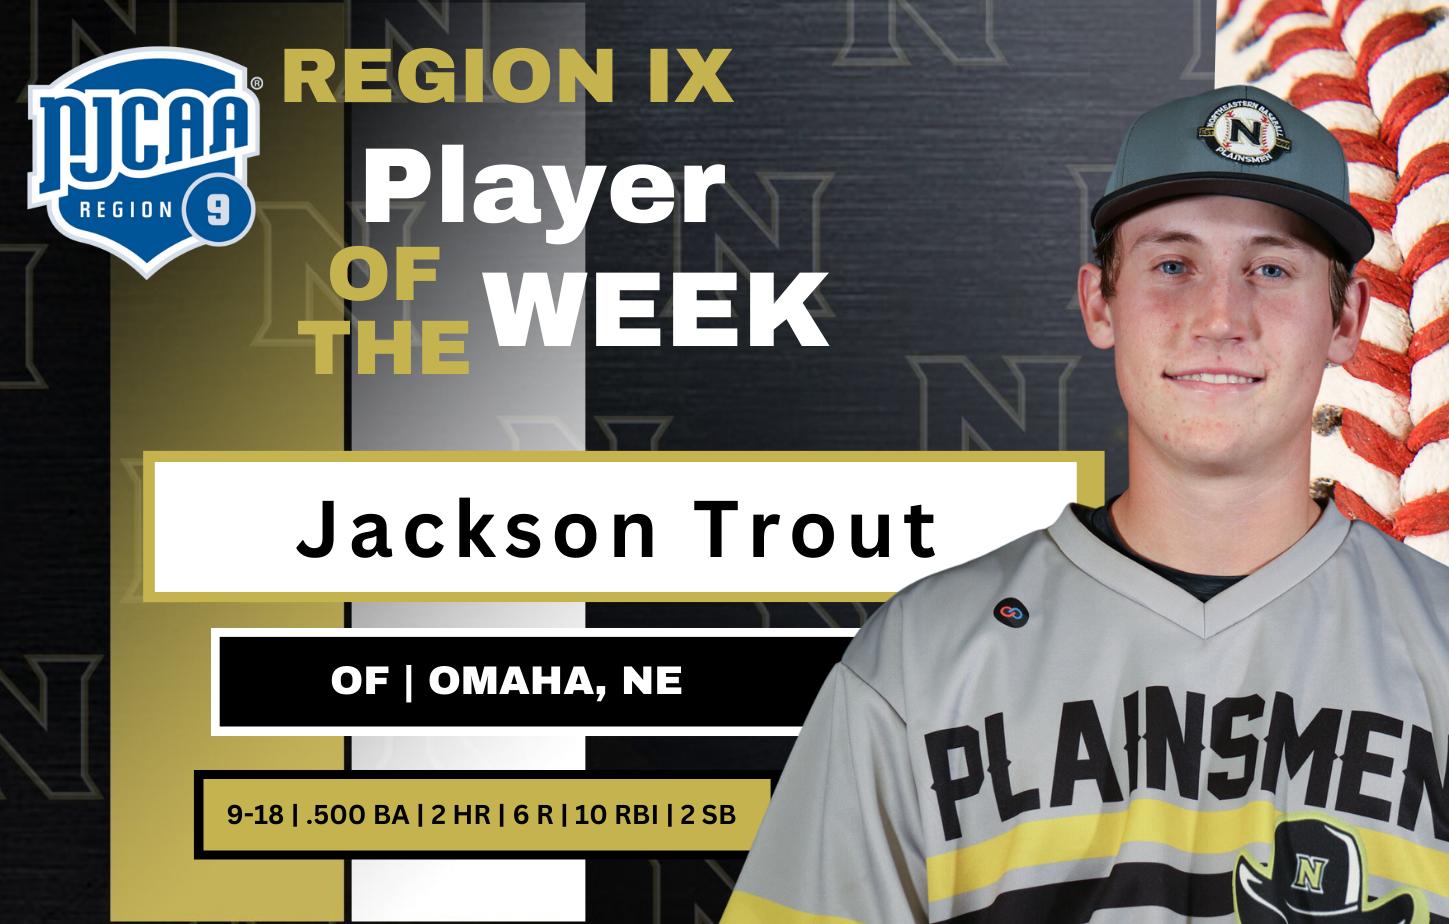 Jackson Trout Gets Region IX Player of the Weeek